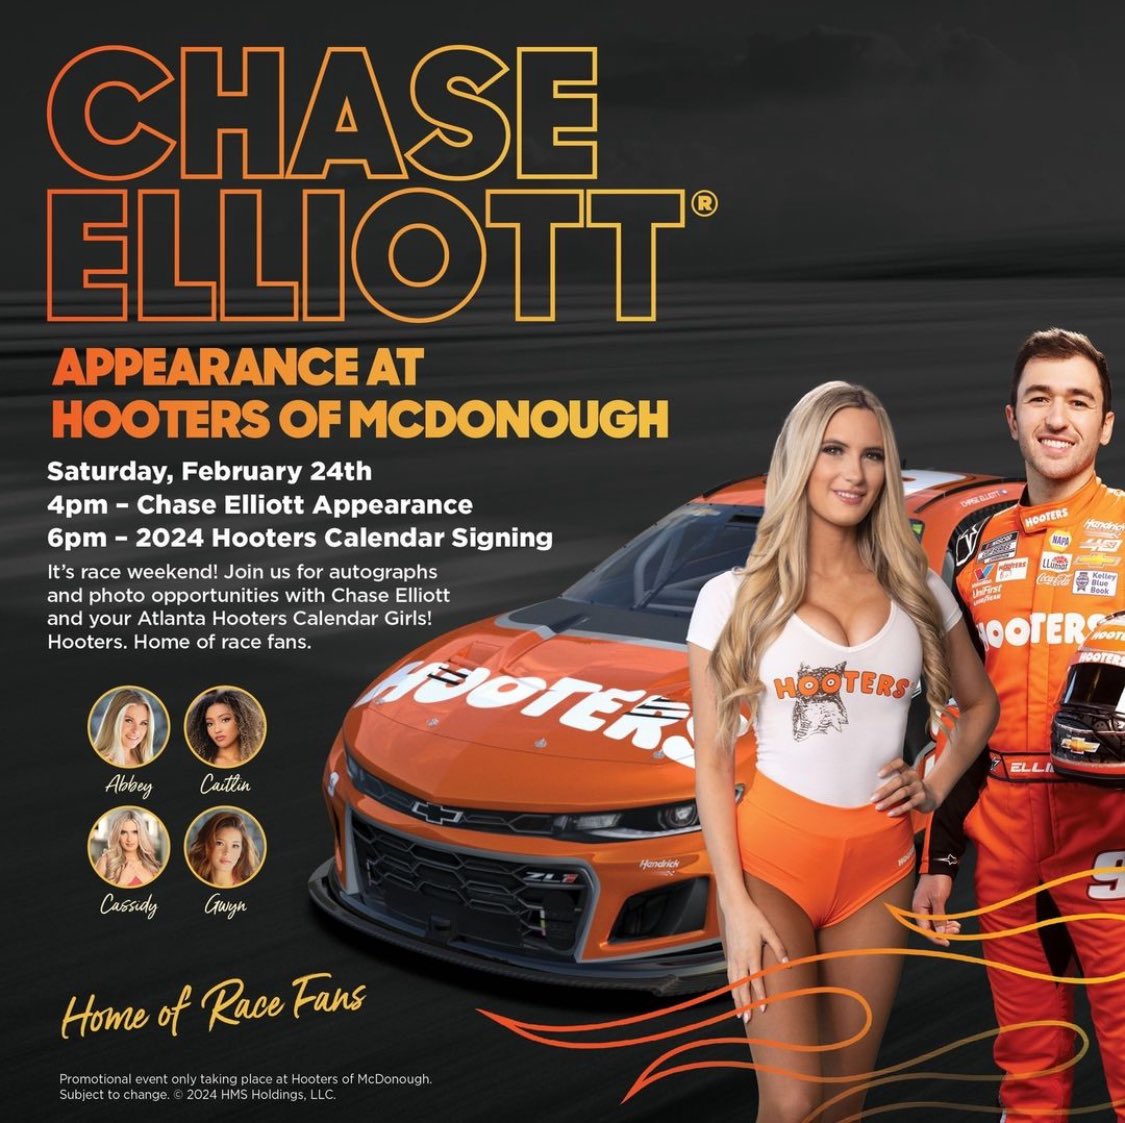 Raise your hand if you will be at @Hooters McDonough tomorrow? 🙋 #CE | #ChaseElliott | #Hooters | #NASCAR